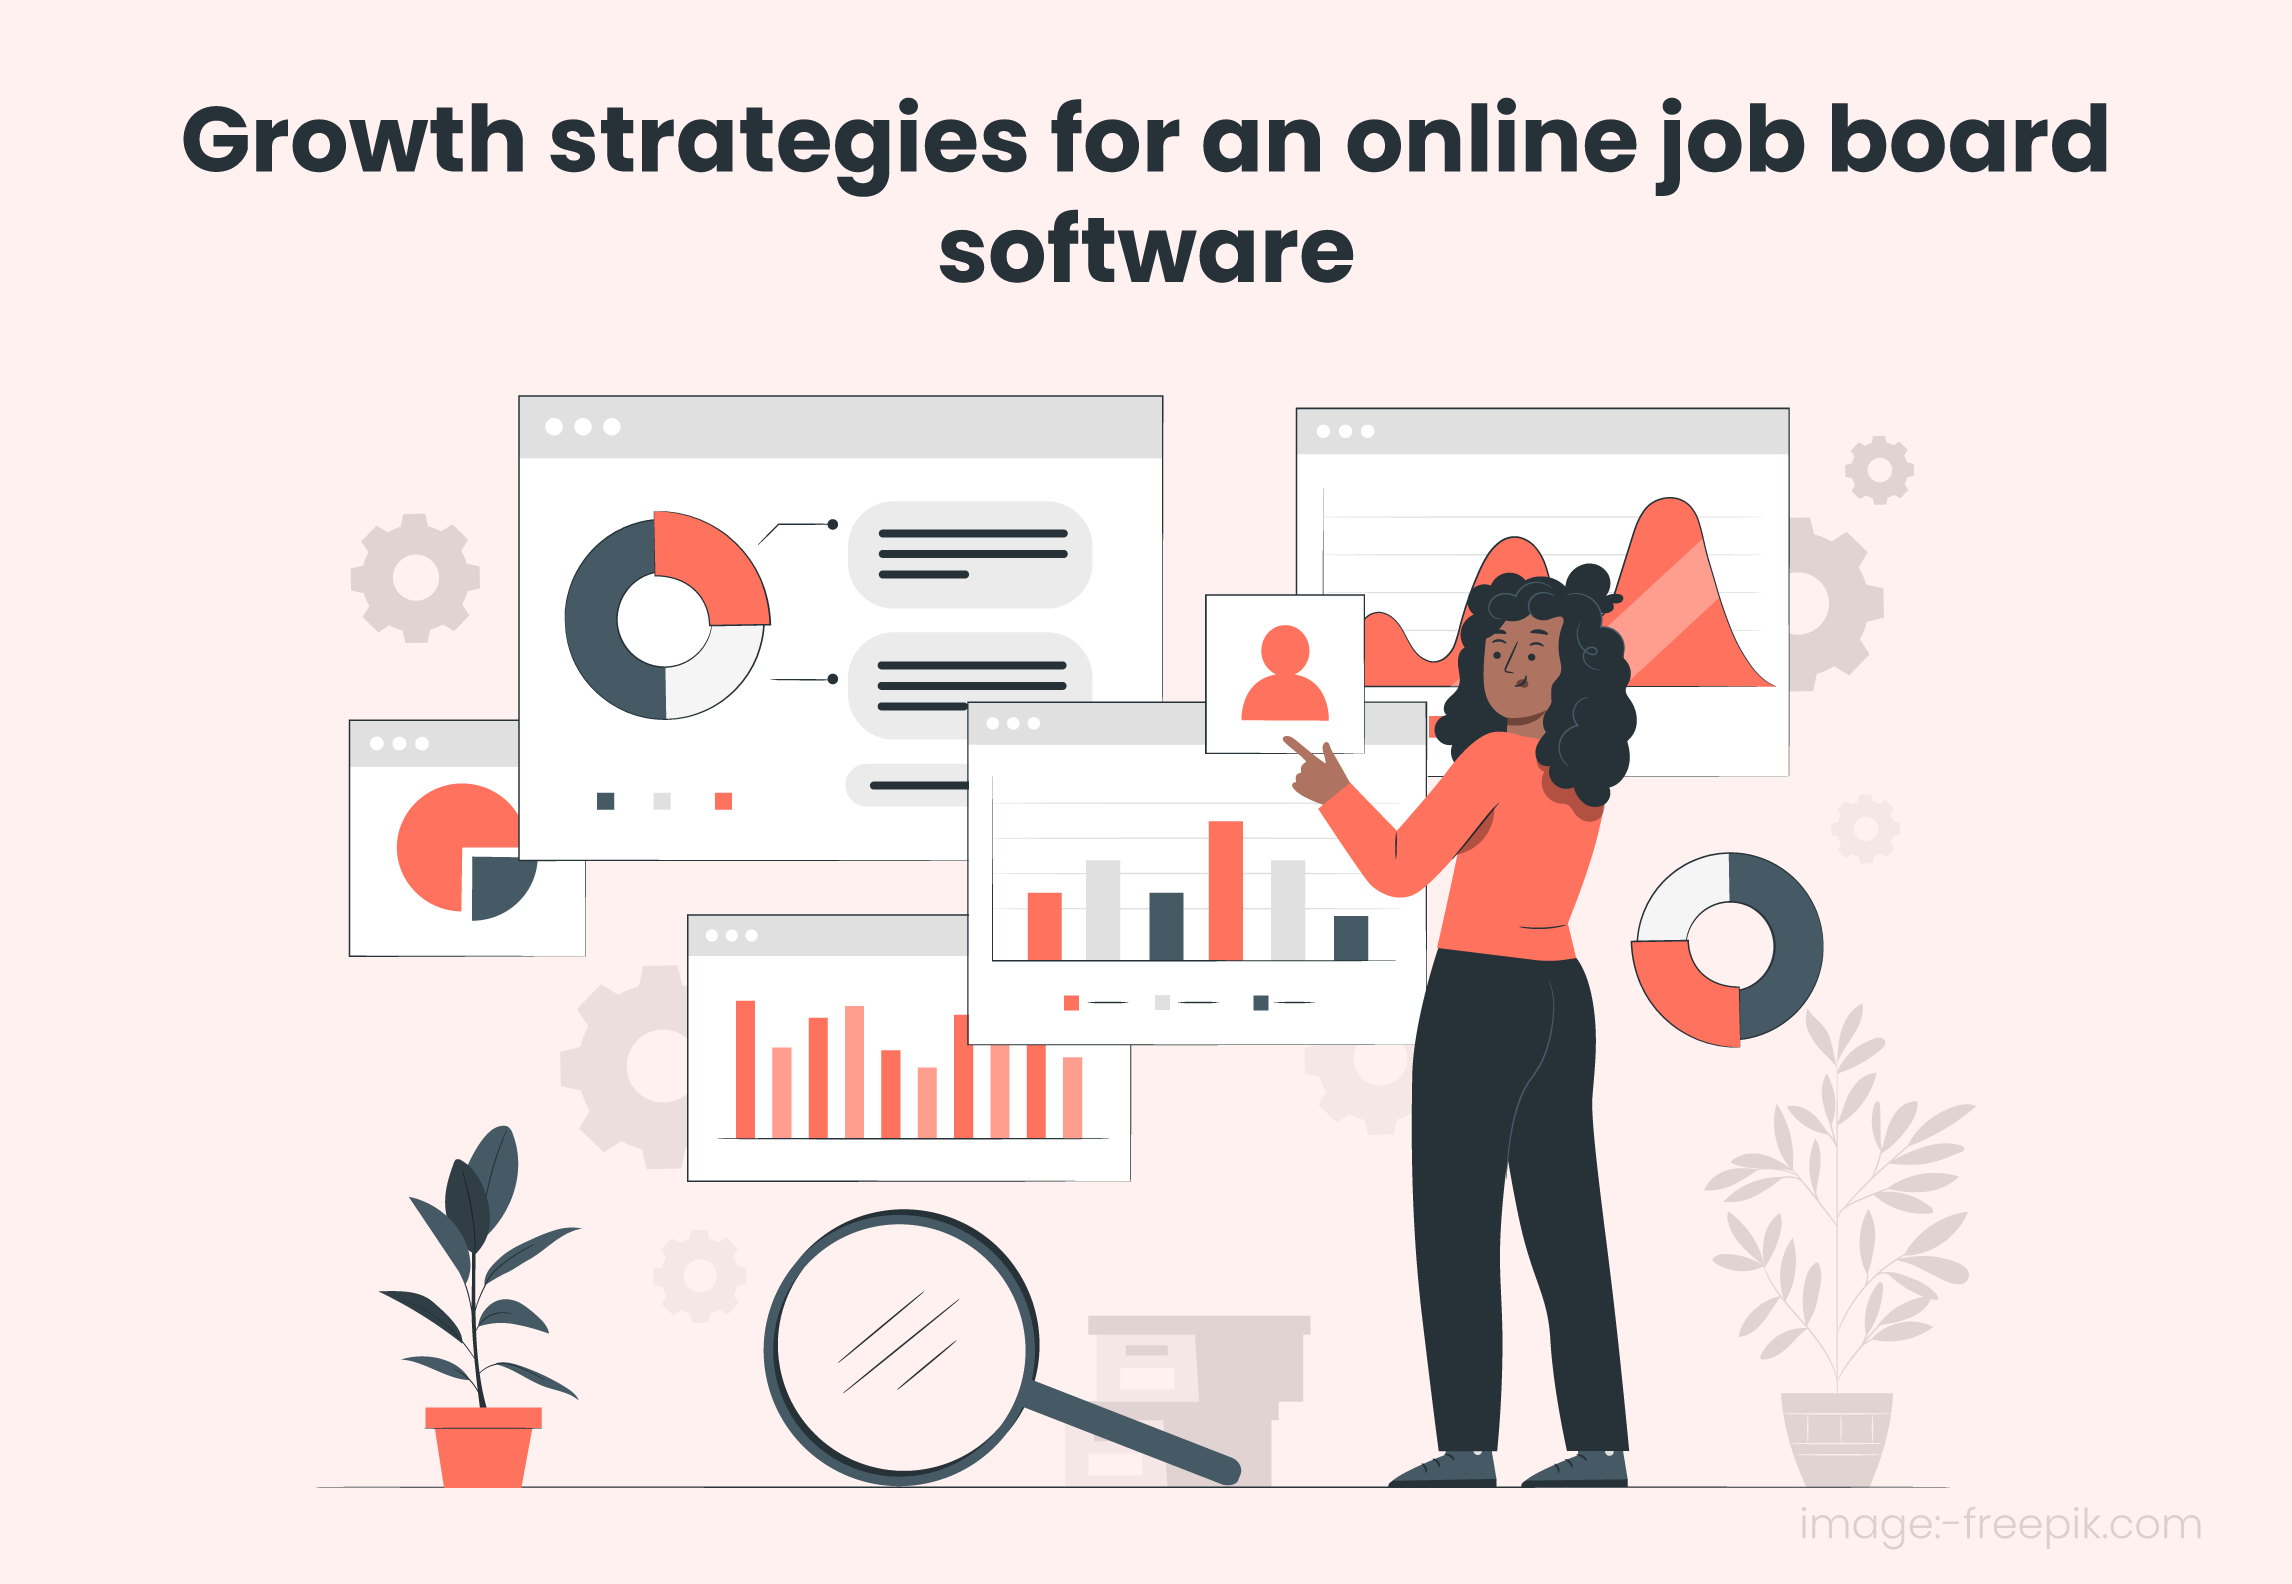 Growth strategies for an online job board software - Knovator